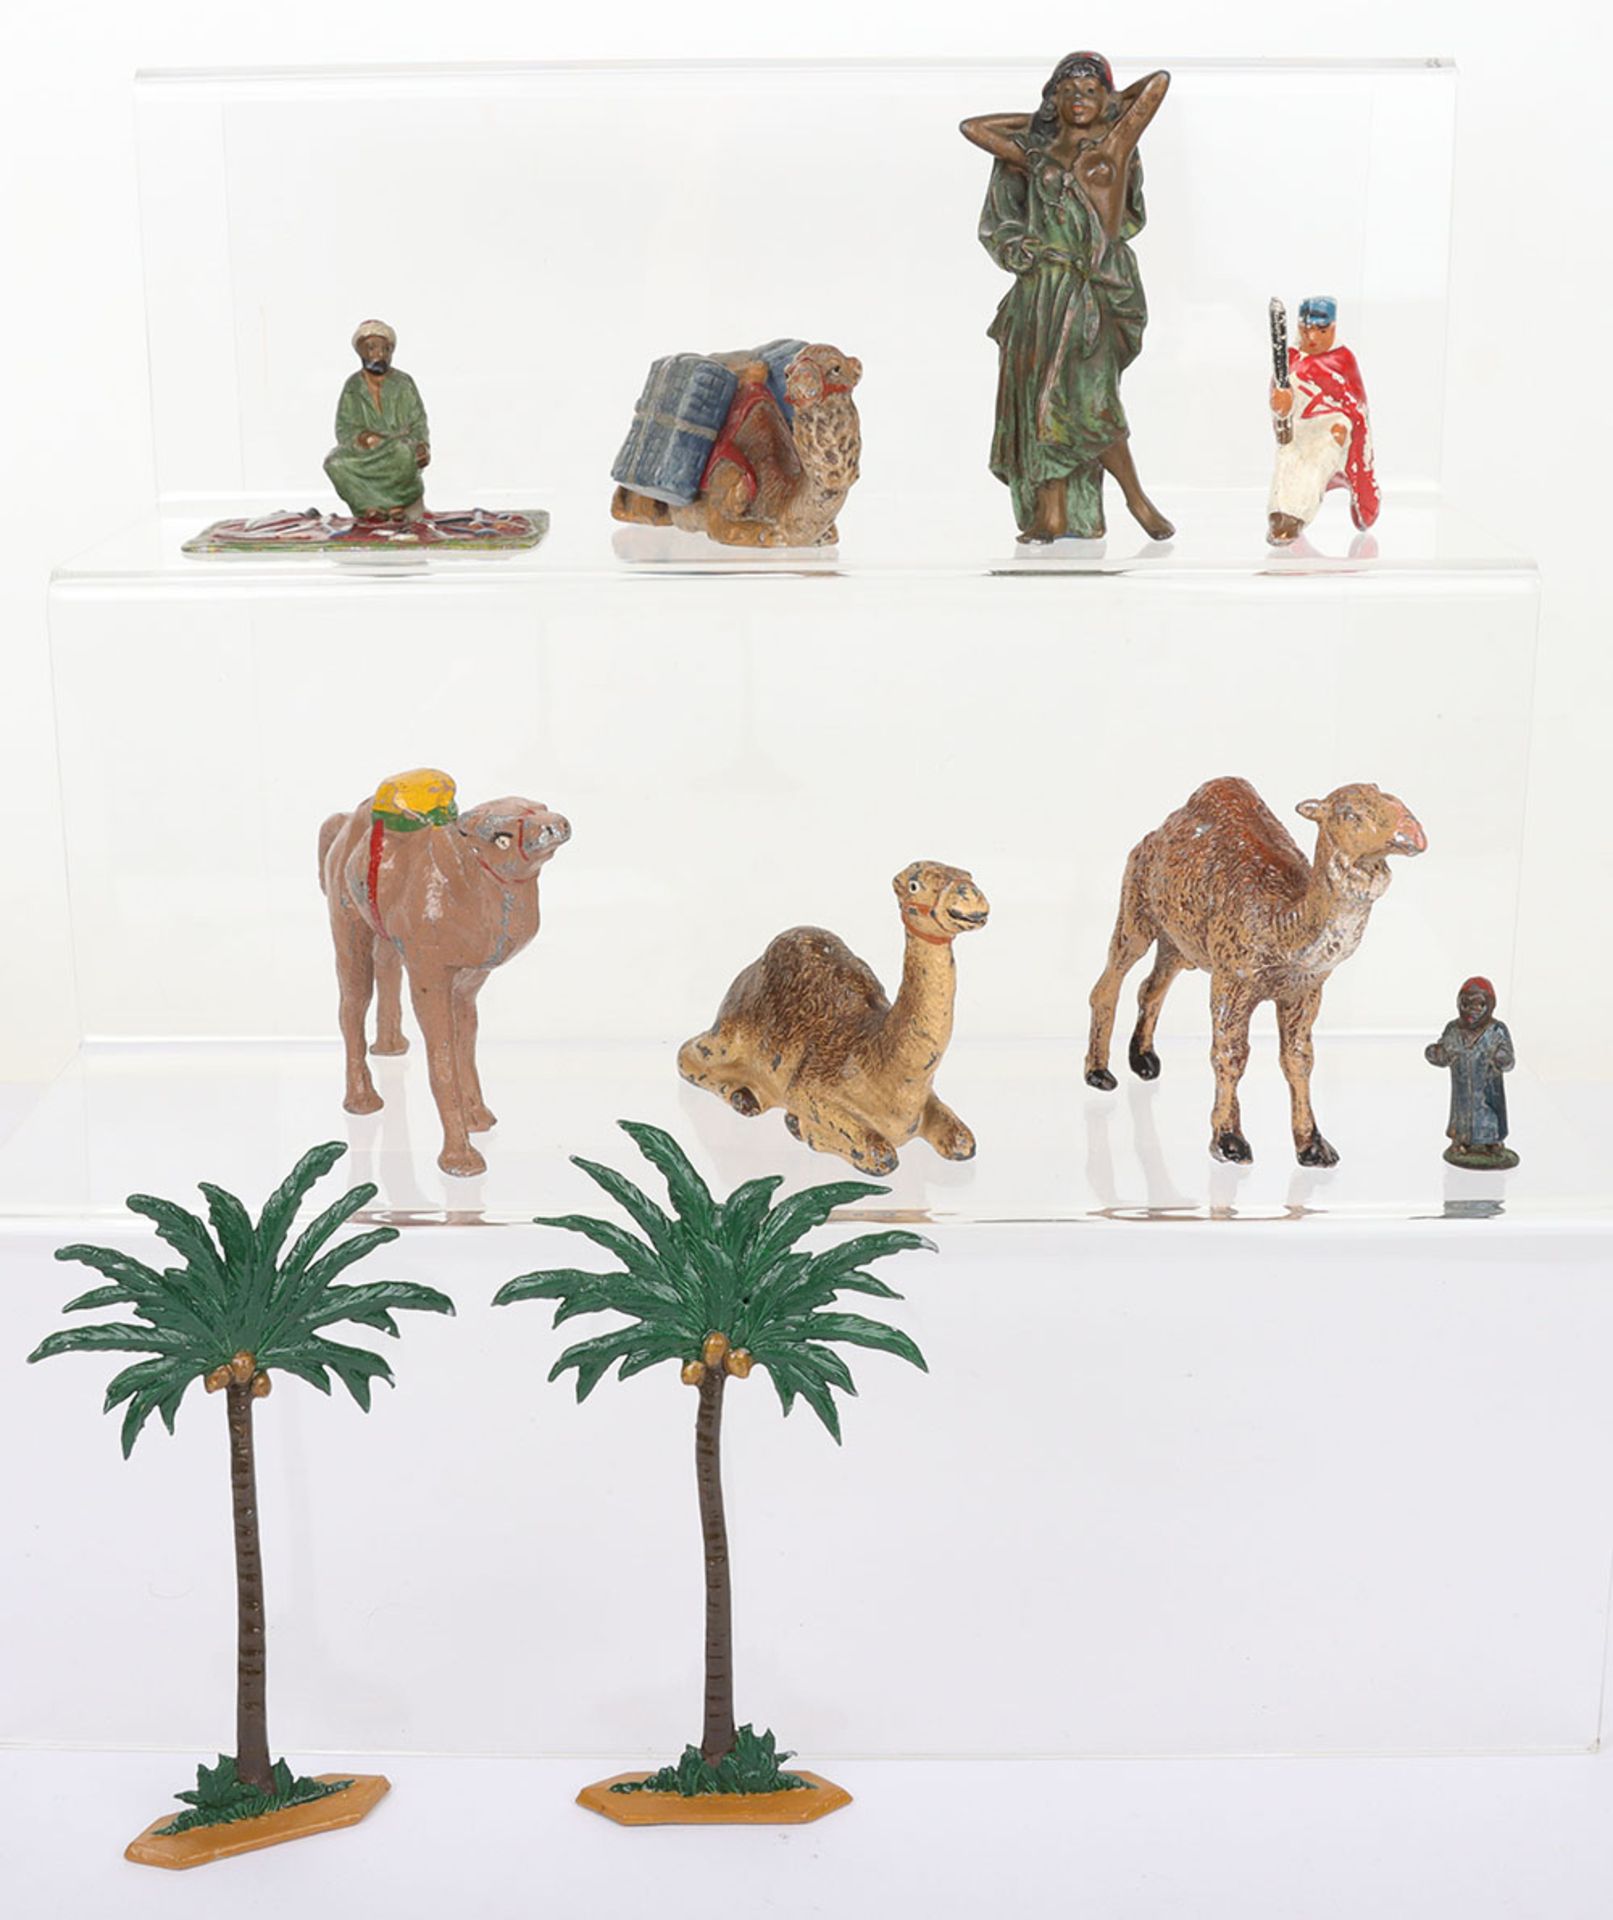 Lead painted Middle Eastern figures and camels